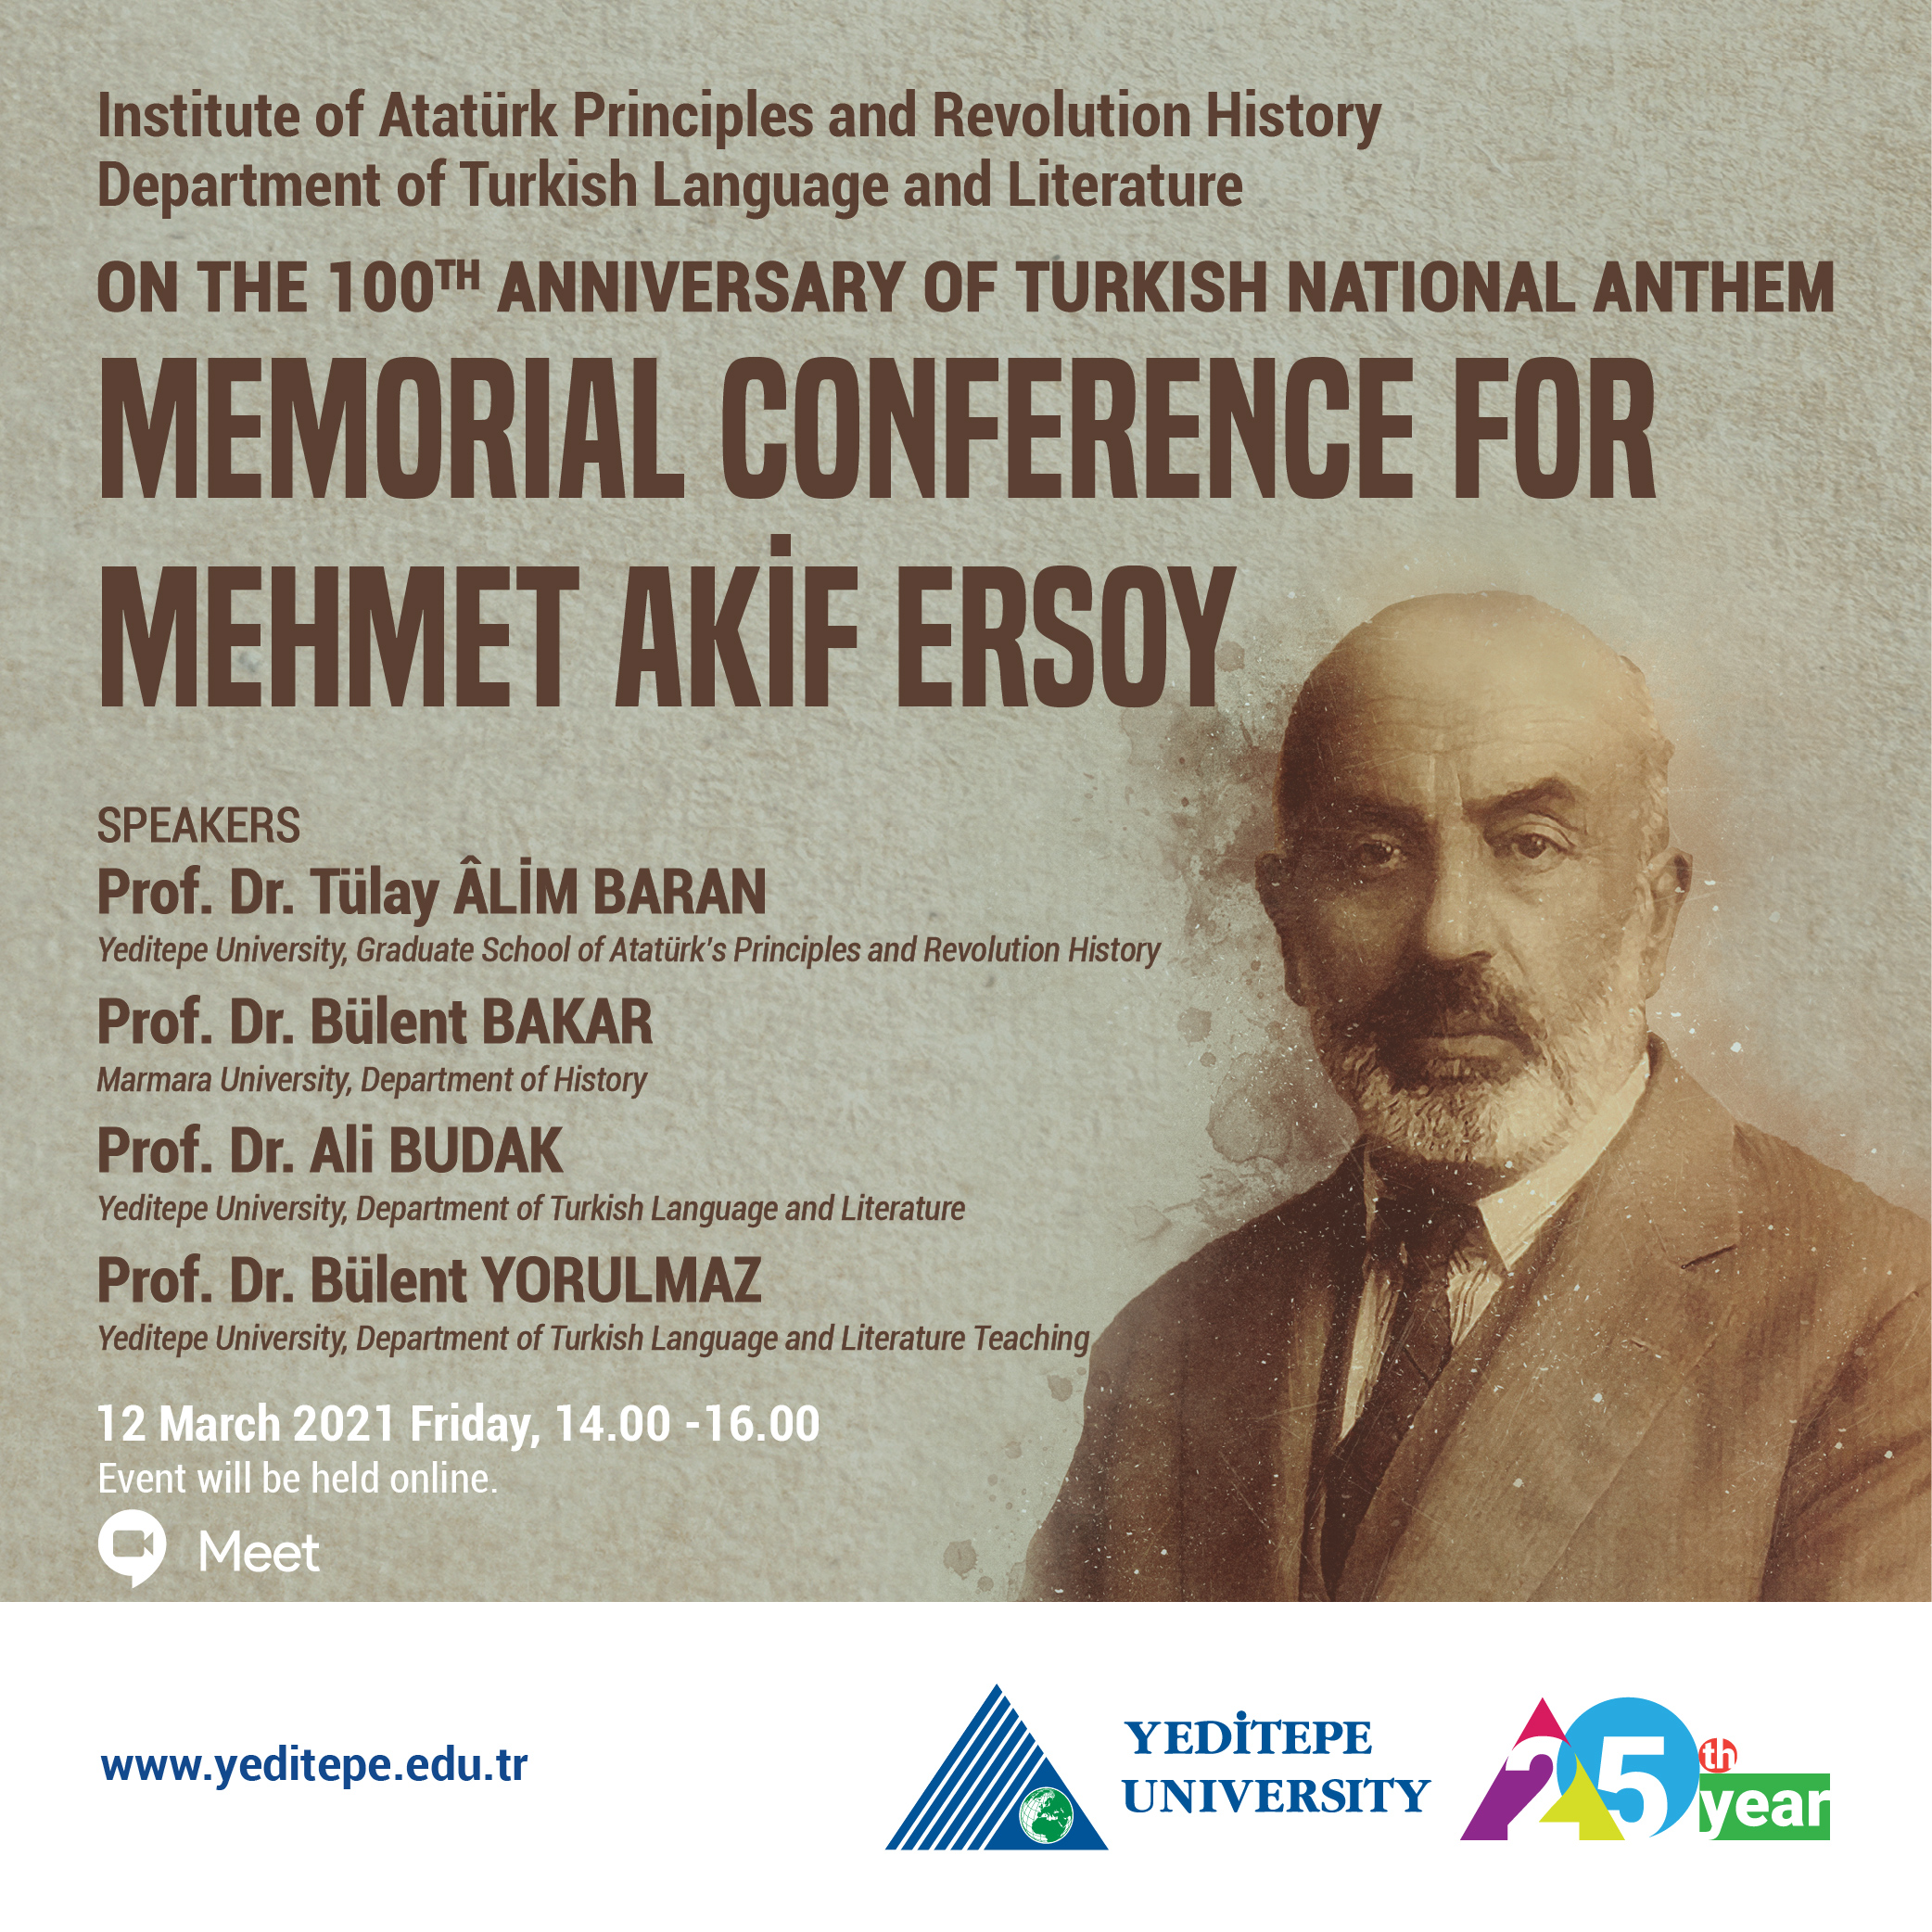 On The 100th Anniversary of Turkish National Anthem Memorial Conference For Mehmet Akif Ersoy